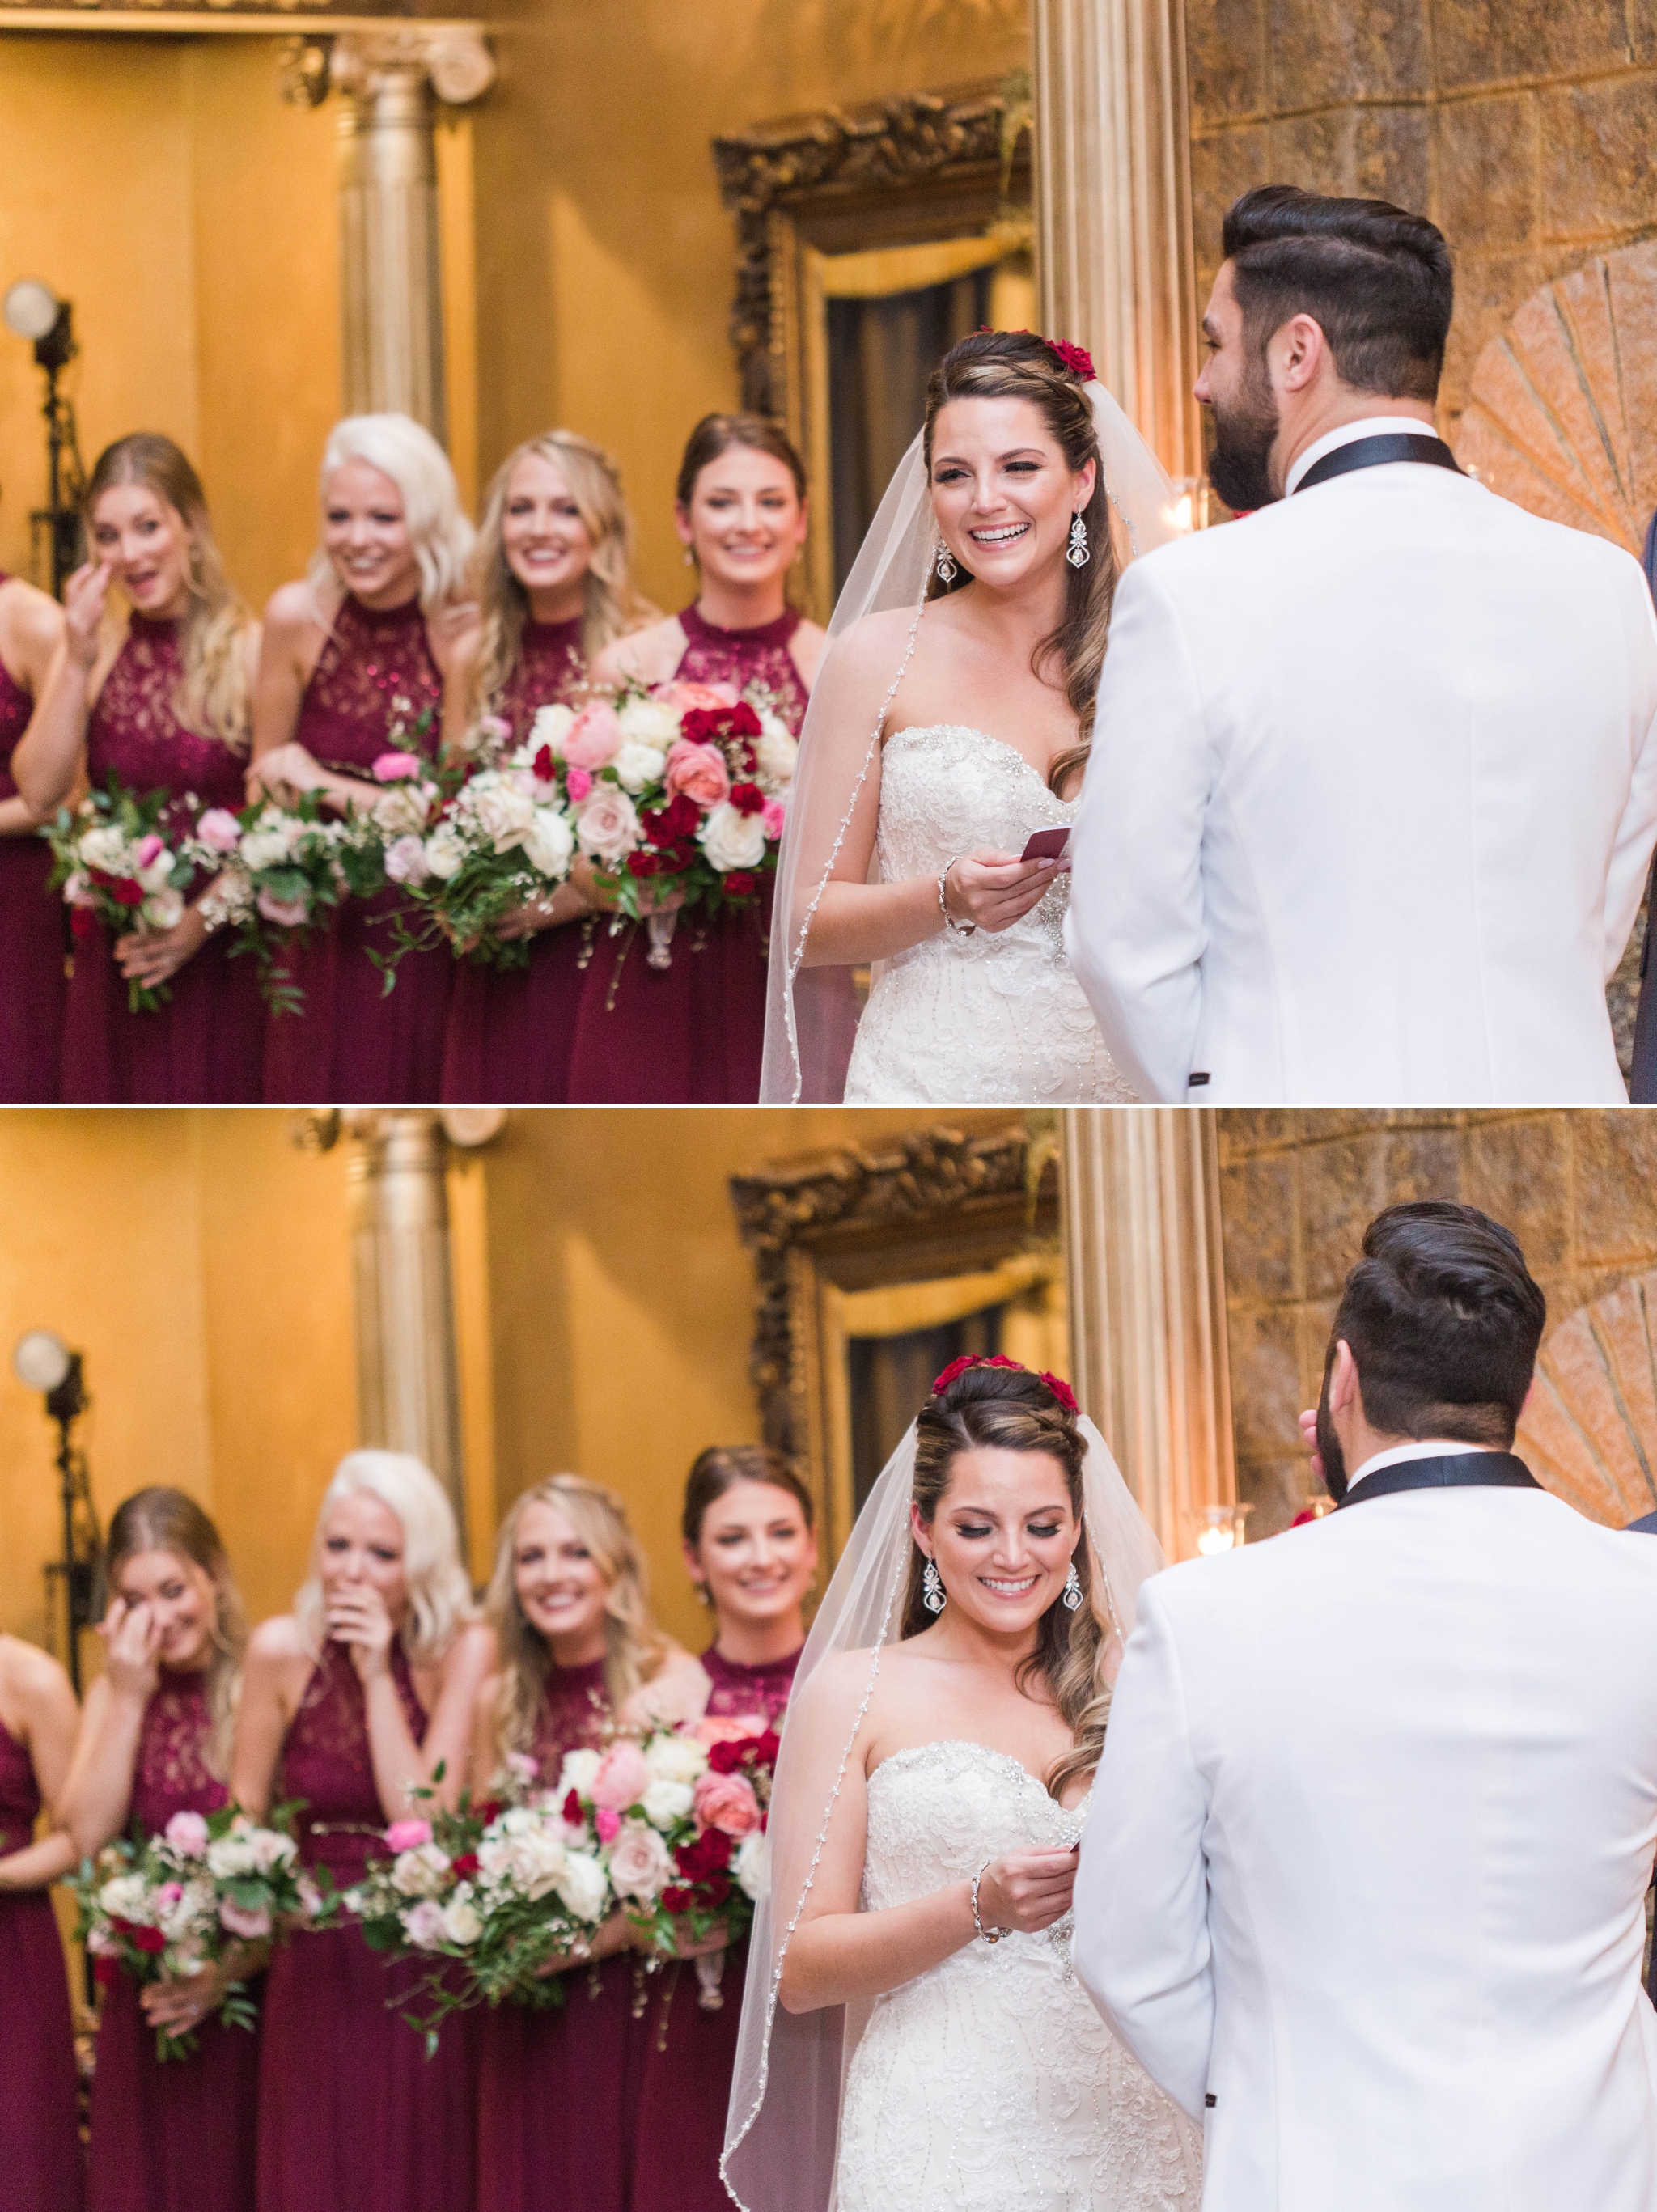 Bride laughing and crying during the wedding vows - Honolulu Oahu Hawaii Wedding Photographer